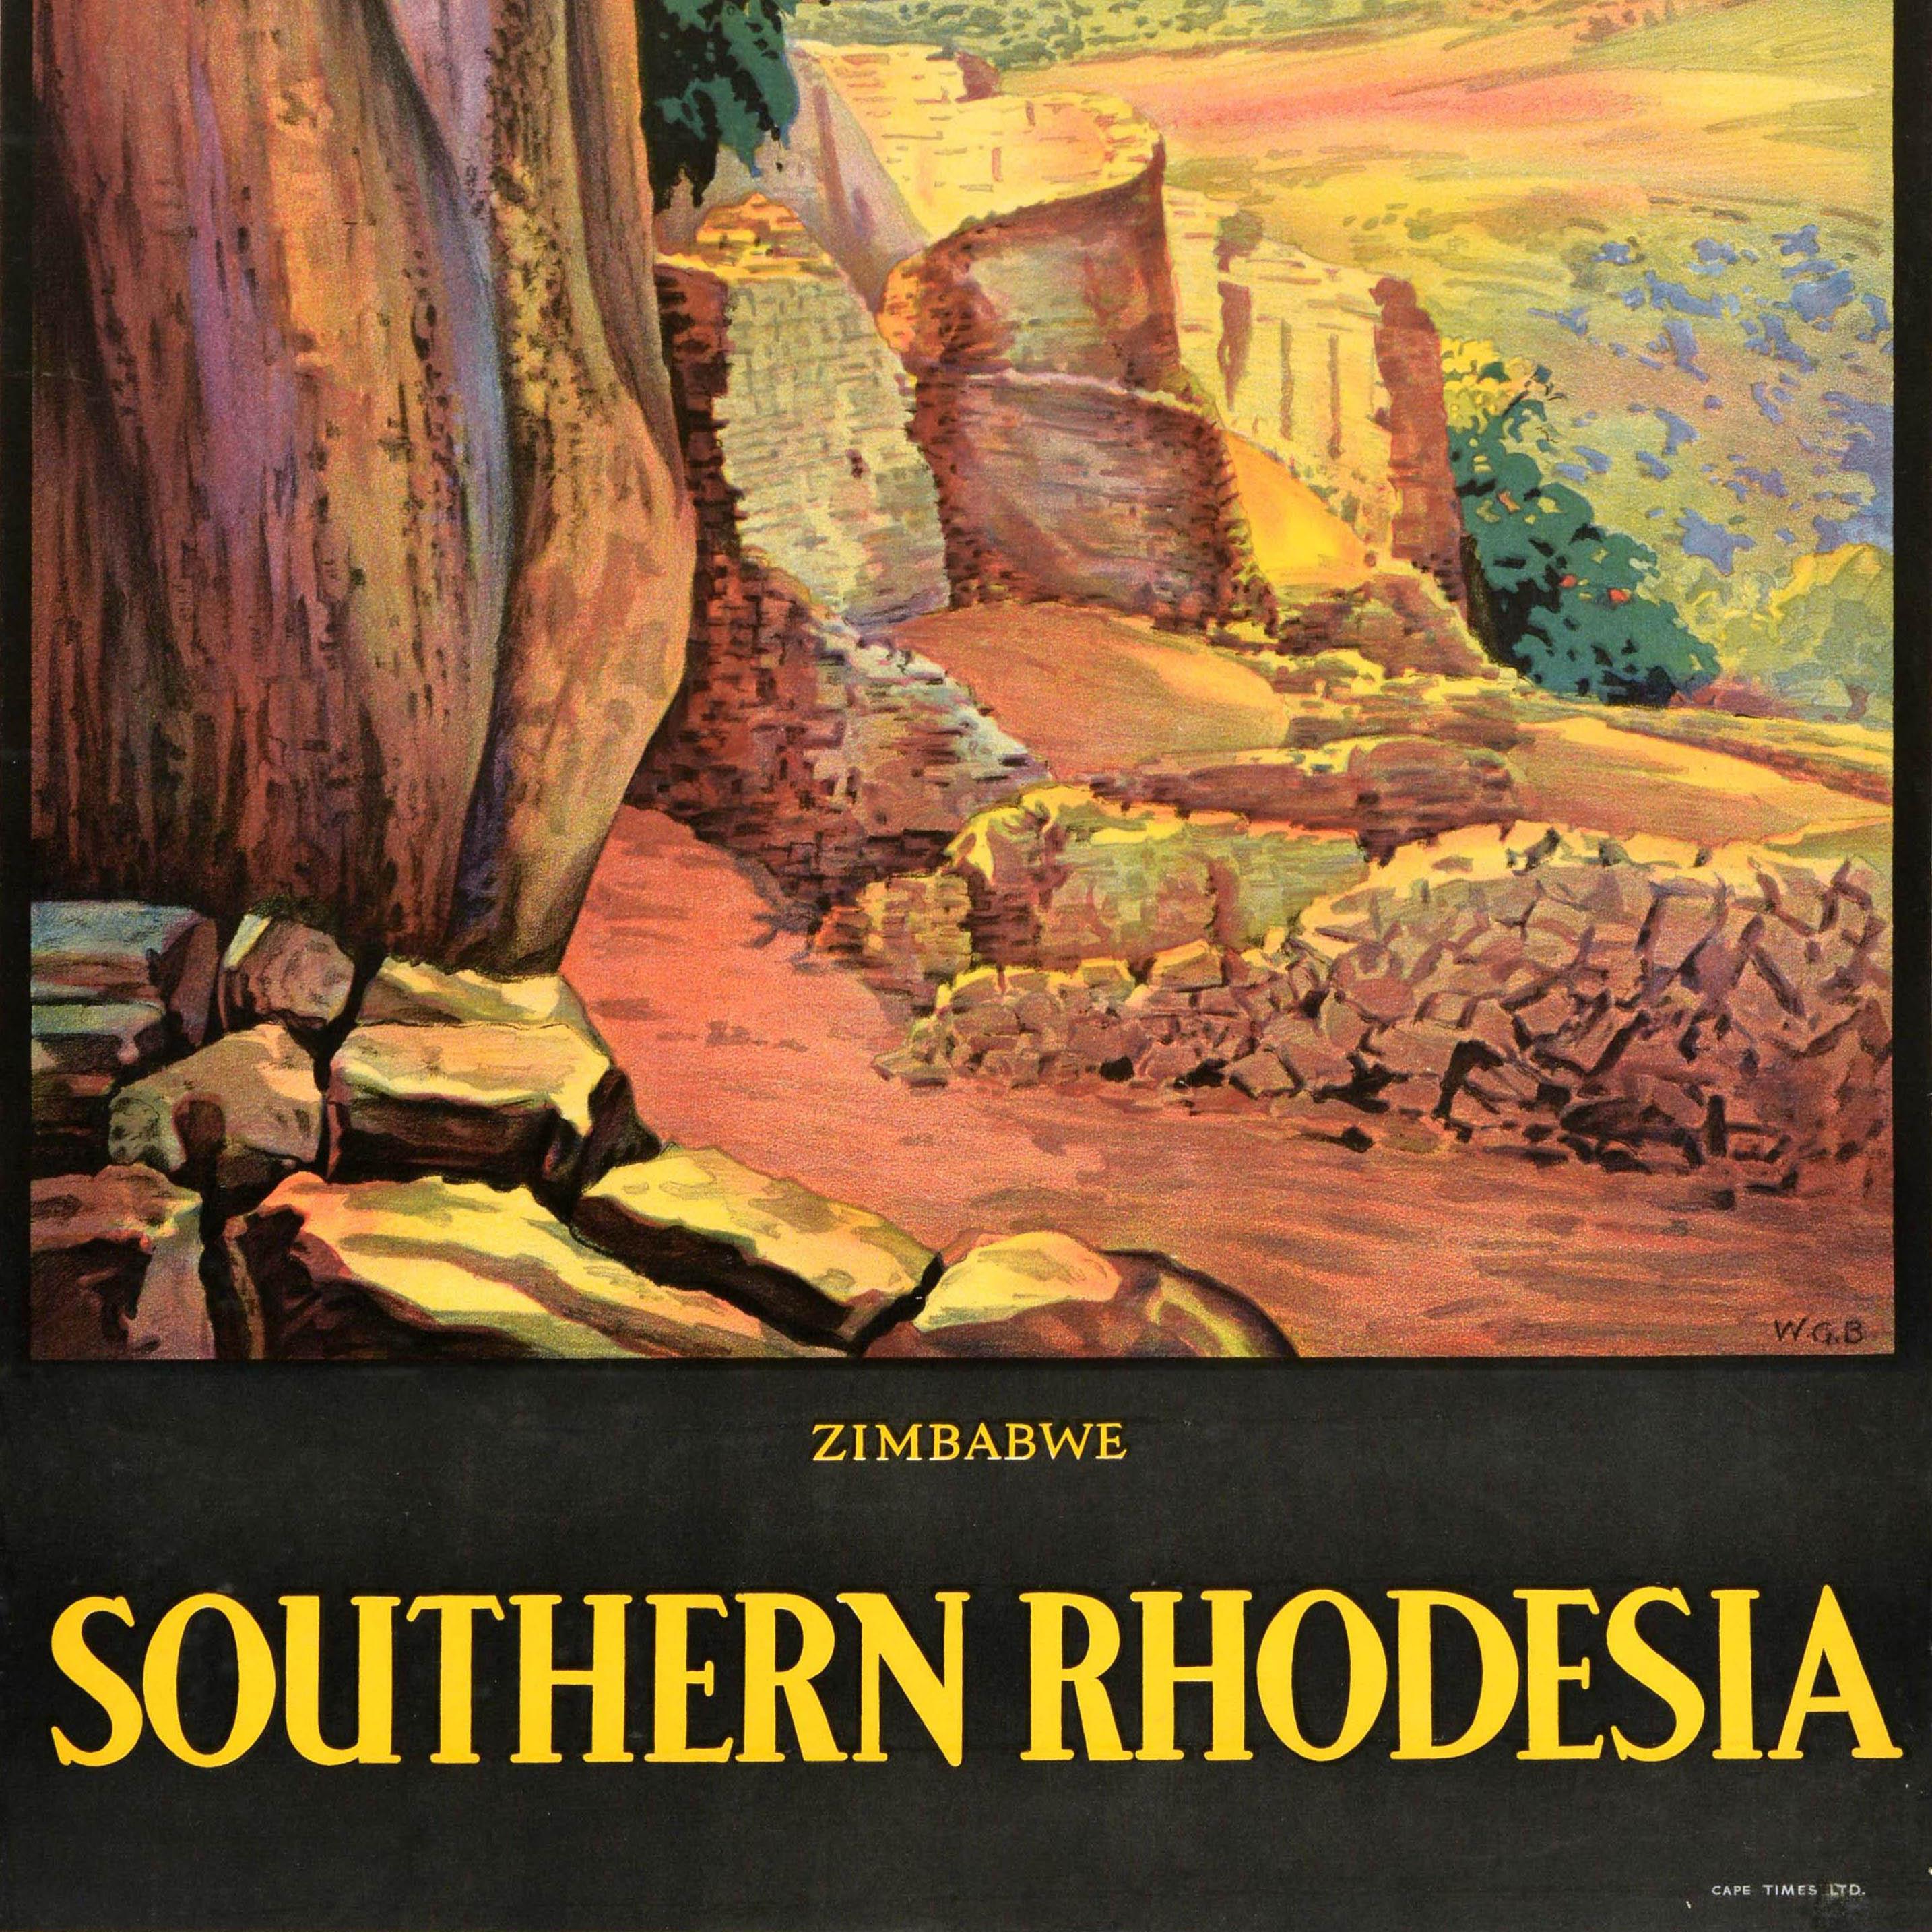 Original Vintage Africa Travel Poster Southern Rhodesia Zimbabwe Ancient City For Sale 1